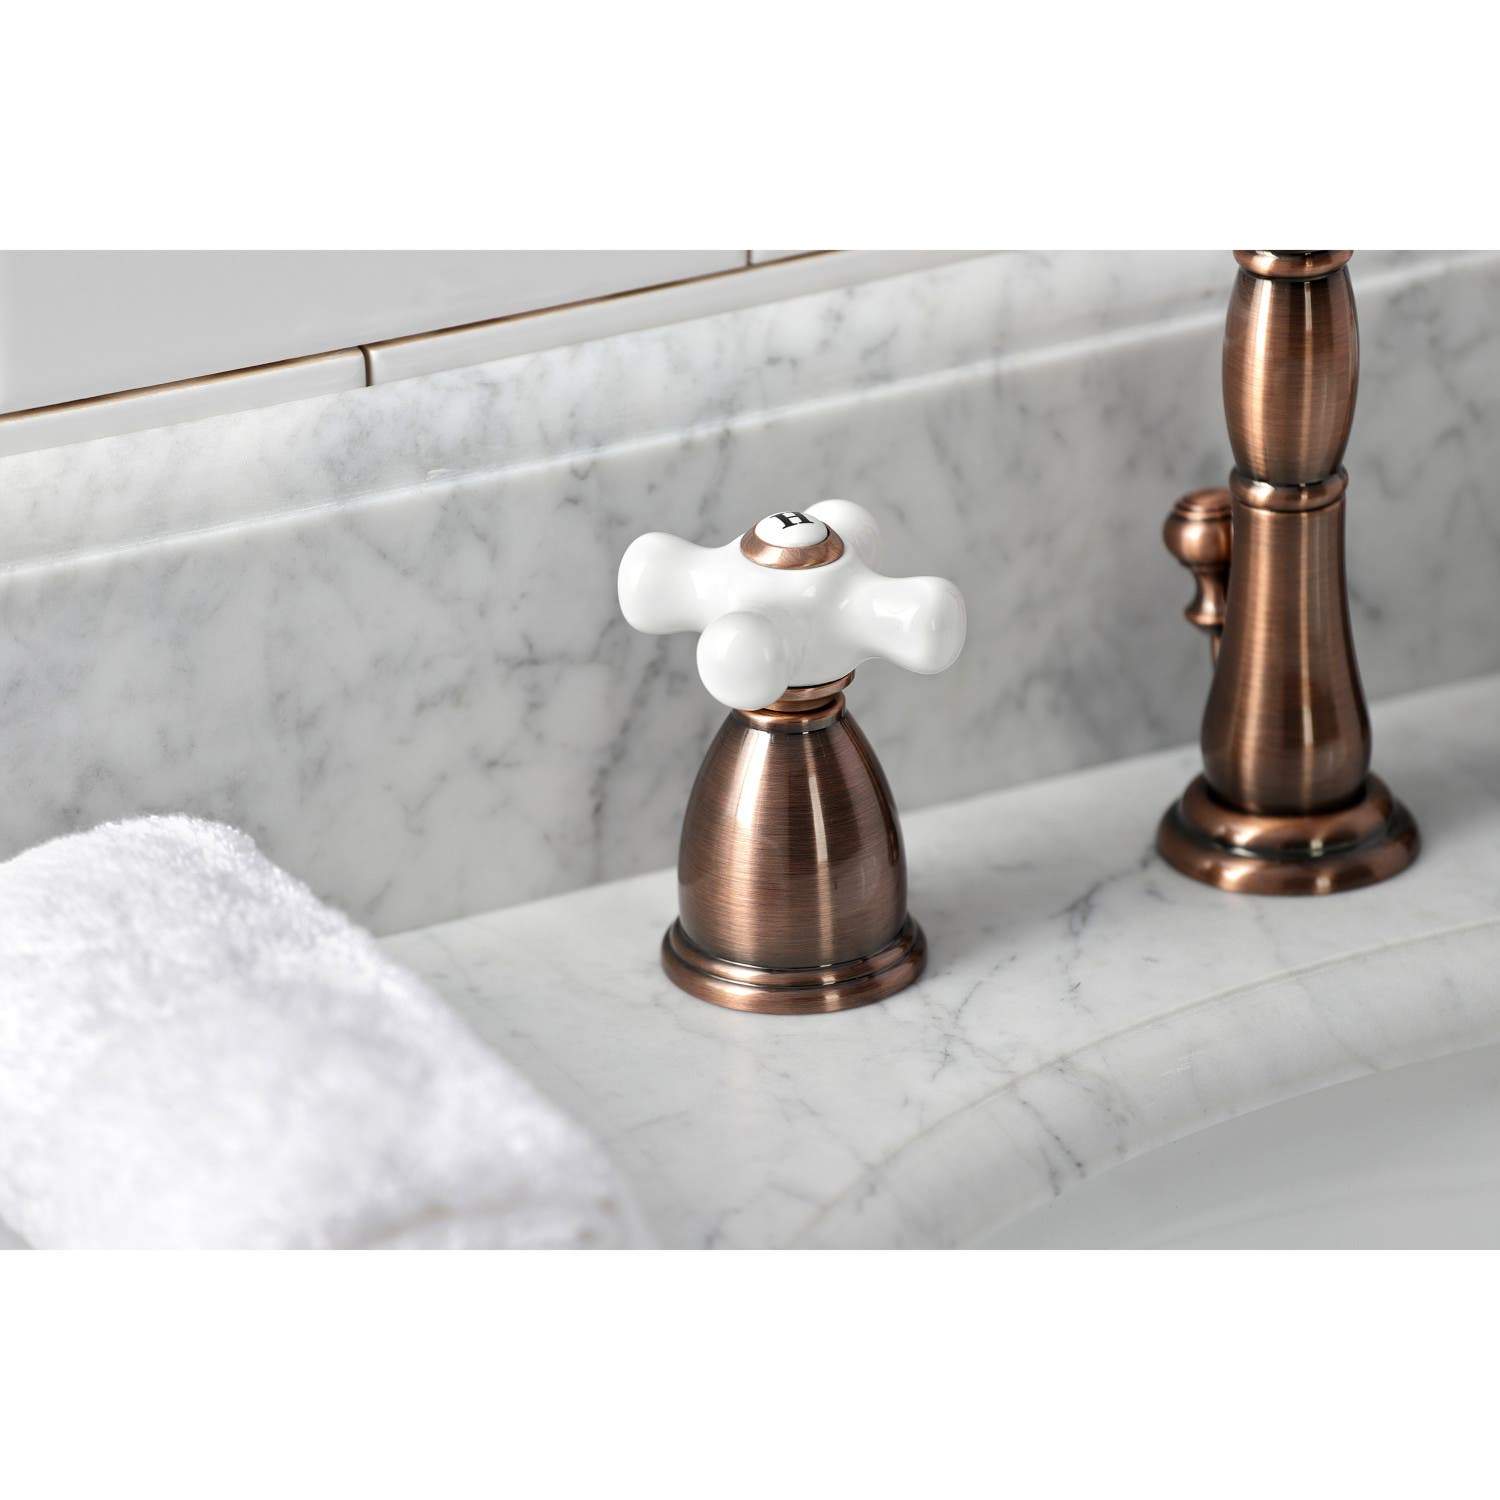 Kingston Brass KB197PXAC 8 in. Widespread Bathroom Faucet, Antique Copper